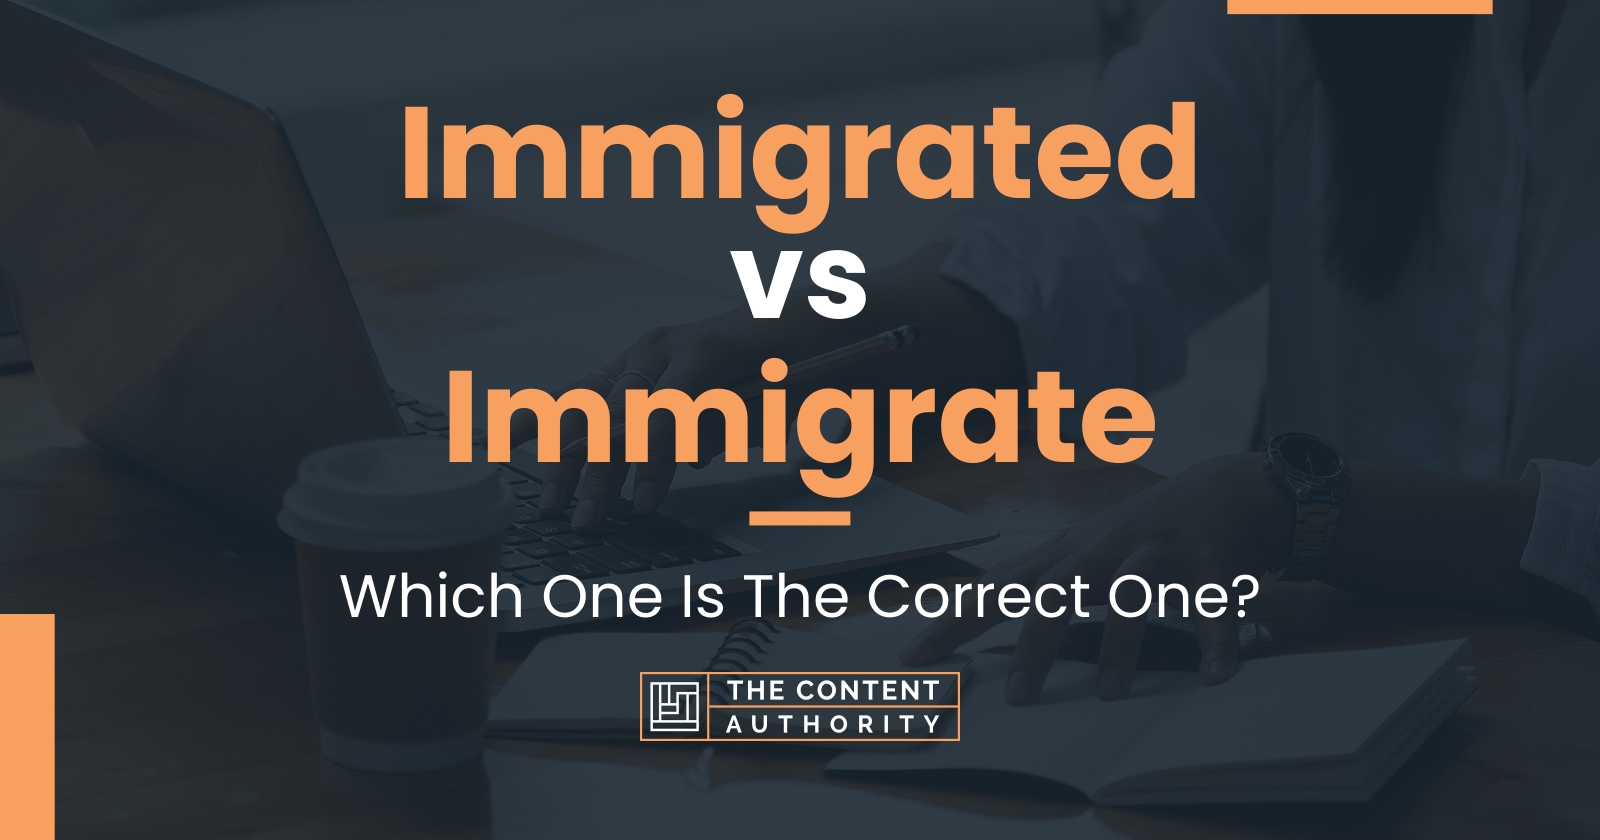 Immigrated vs Immigrate: Which One Is The Correct One?